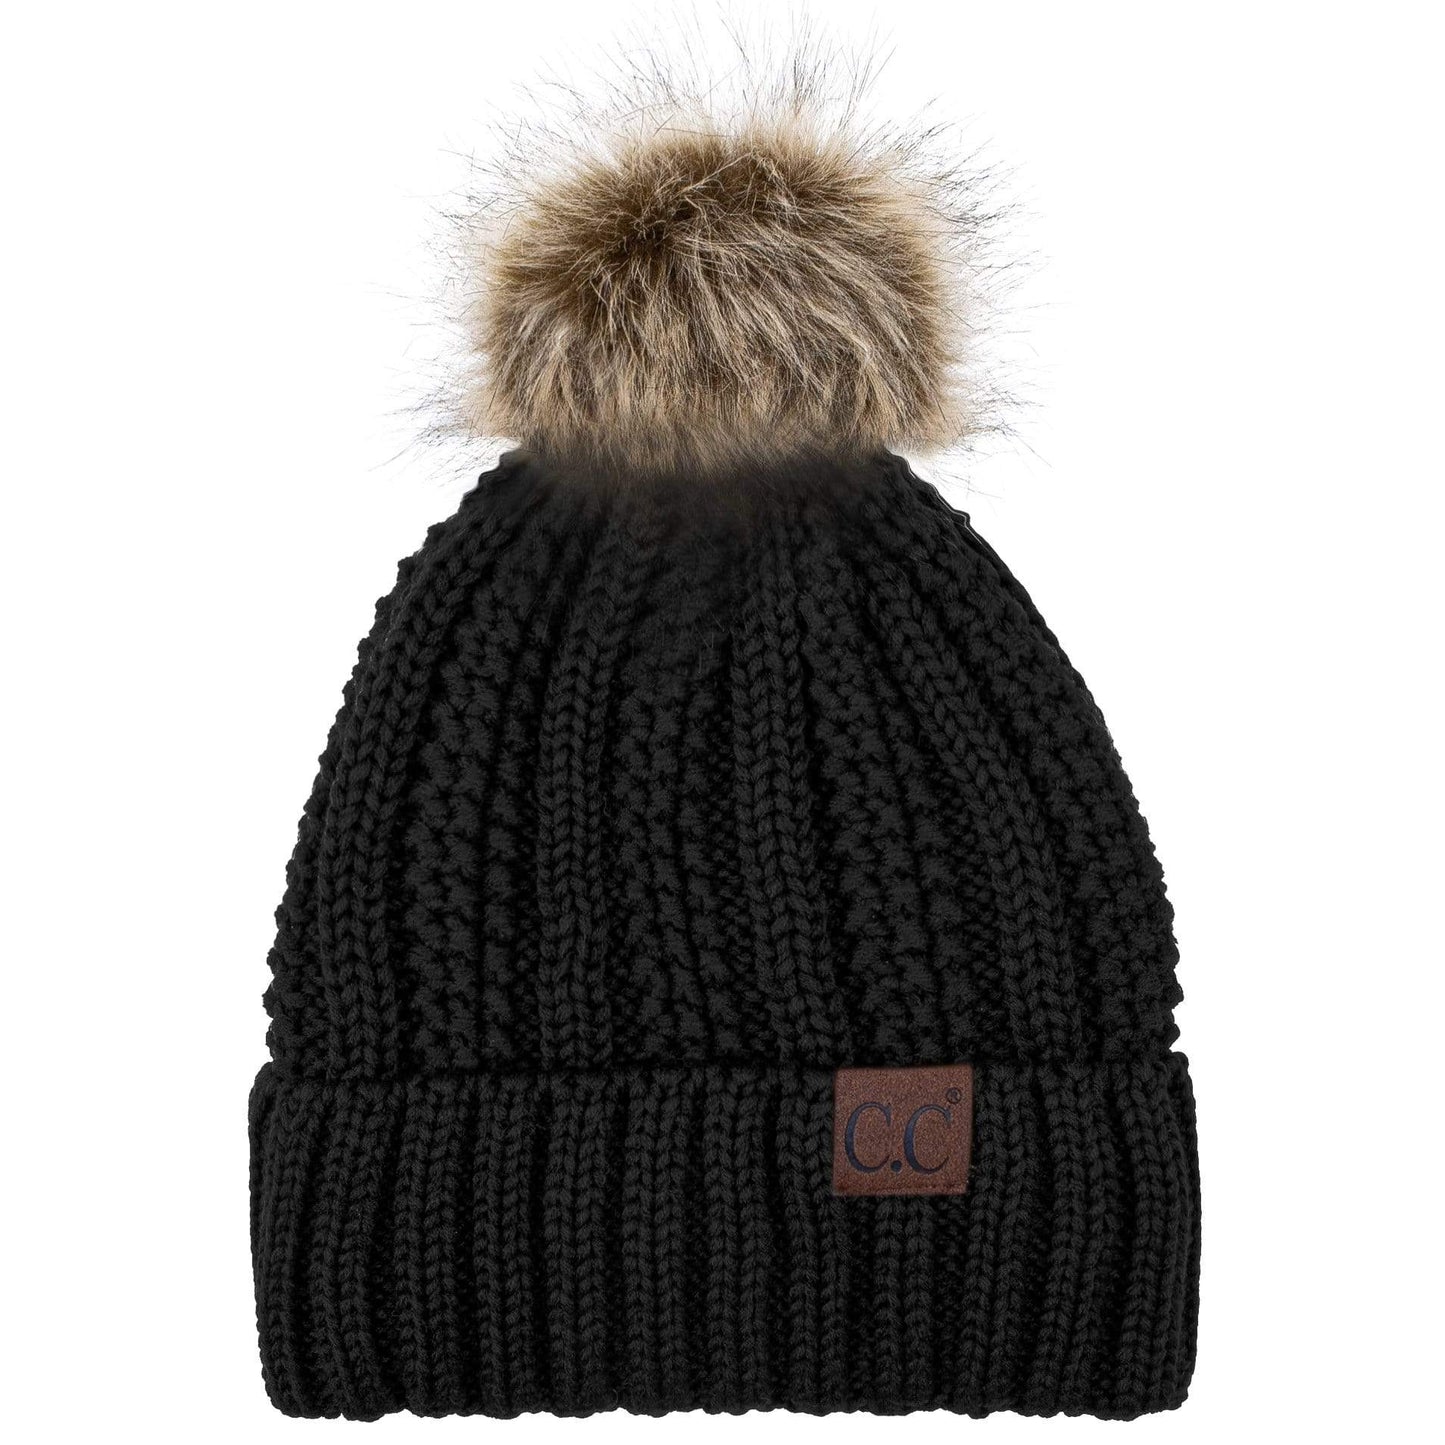 C.C Apparel C.C YJ820 - Thick Cable Knit Hat Faux Fur Pom Pom Fleece Lined Skull Cap Cuff Beanie